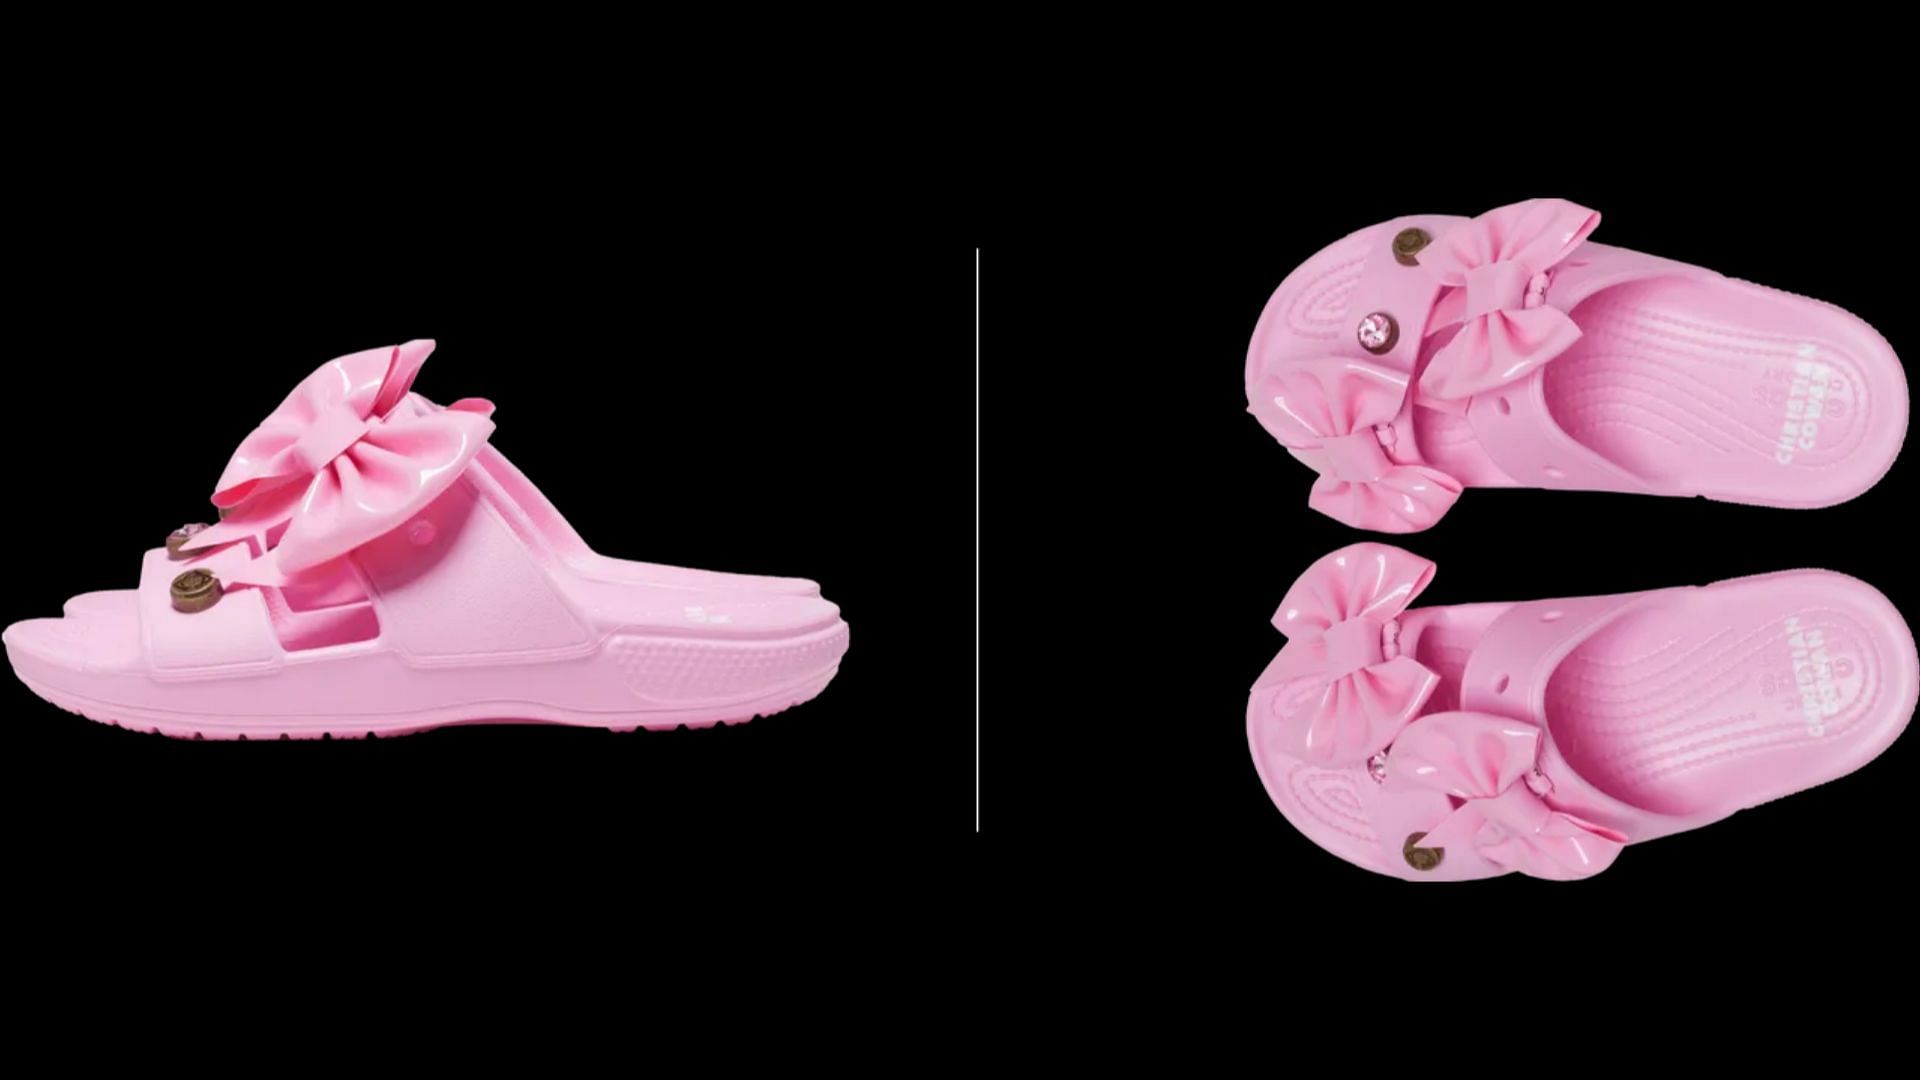 Upcoming 3-piece Christian Cowan x Crocs collection, which was first unveiled at NYFW (Image via Crocs)